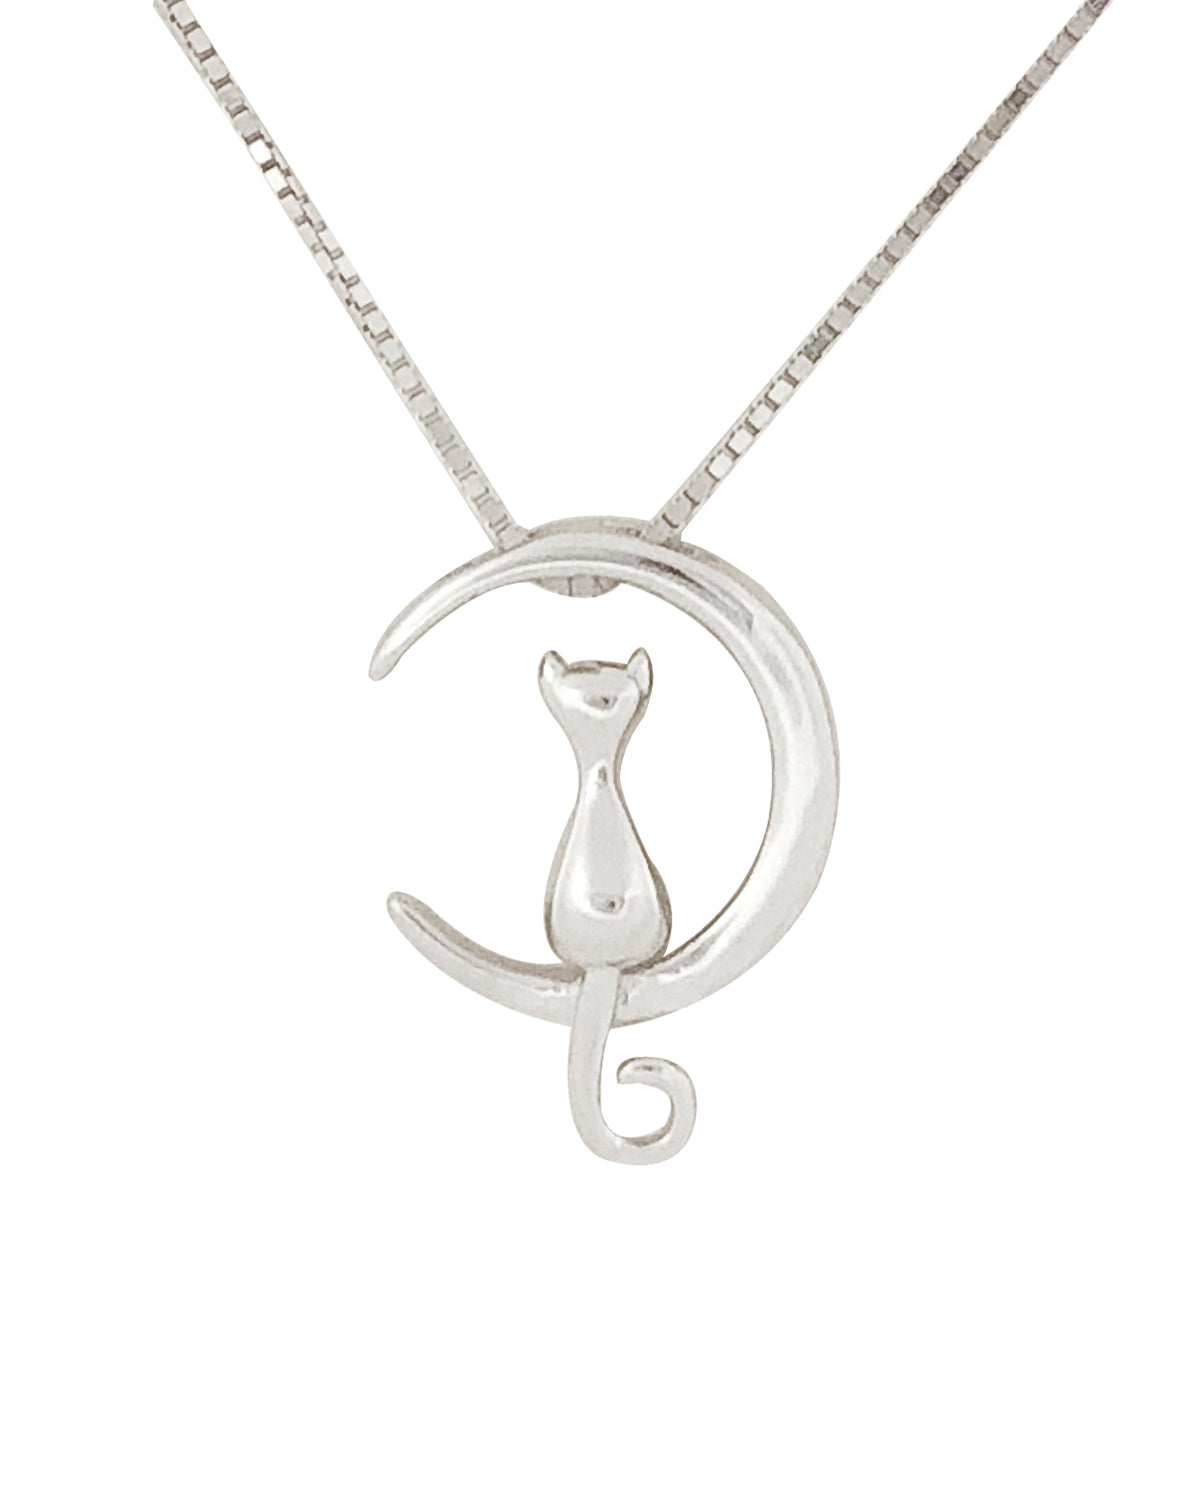 Wrapables 925 Sterling Silver Plated Cat and Moon Pendant Necklace